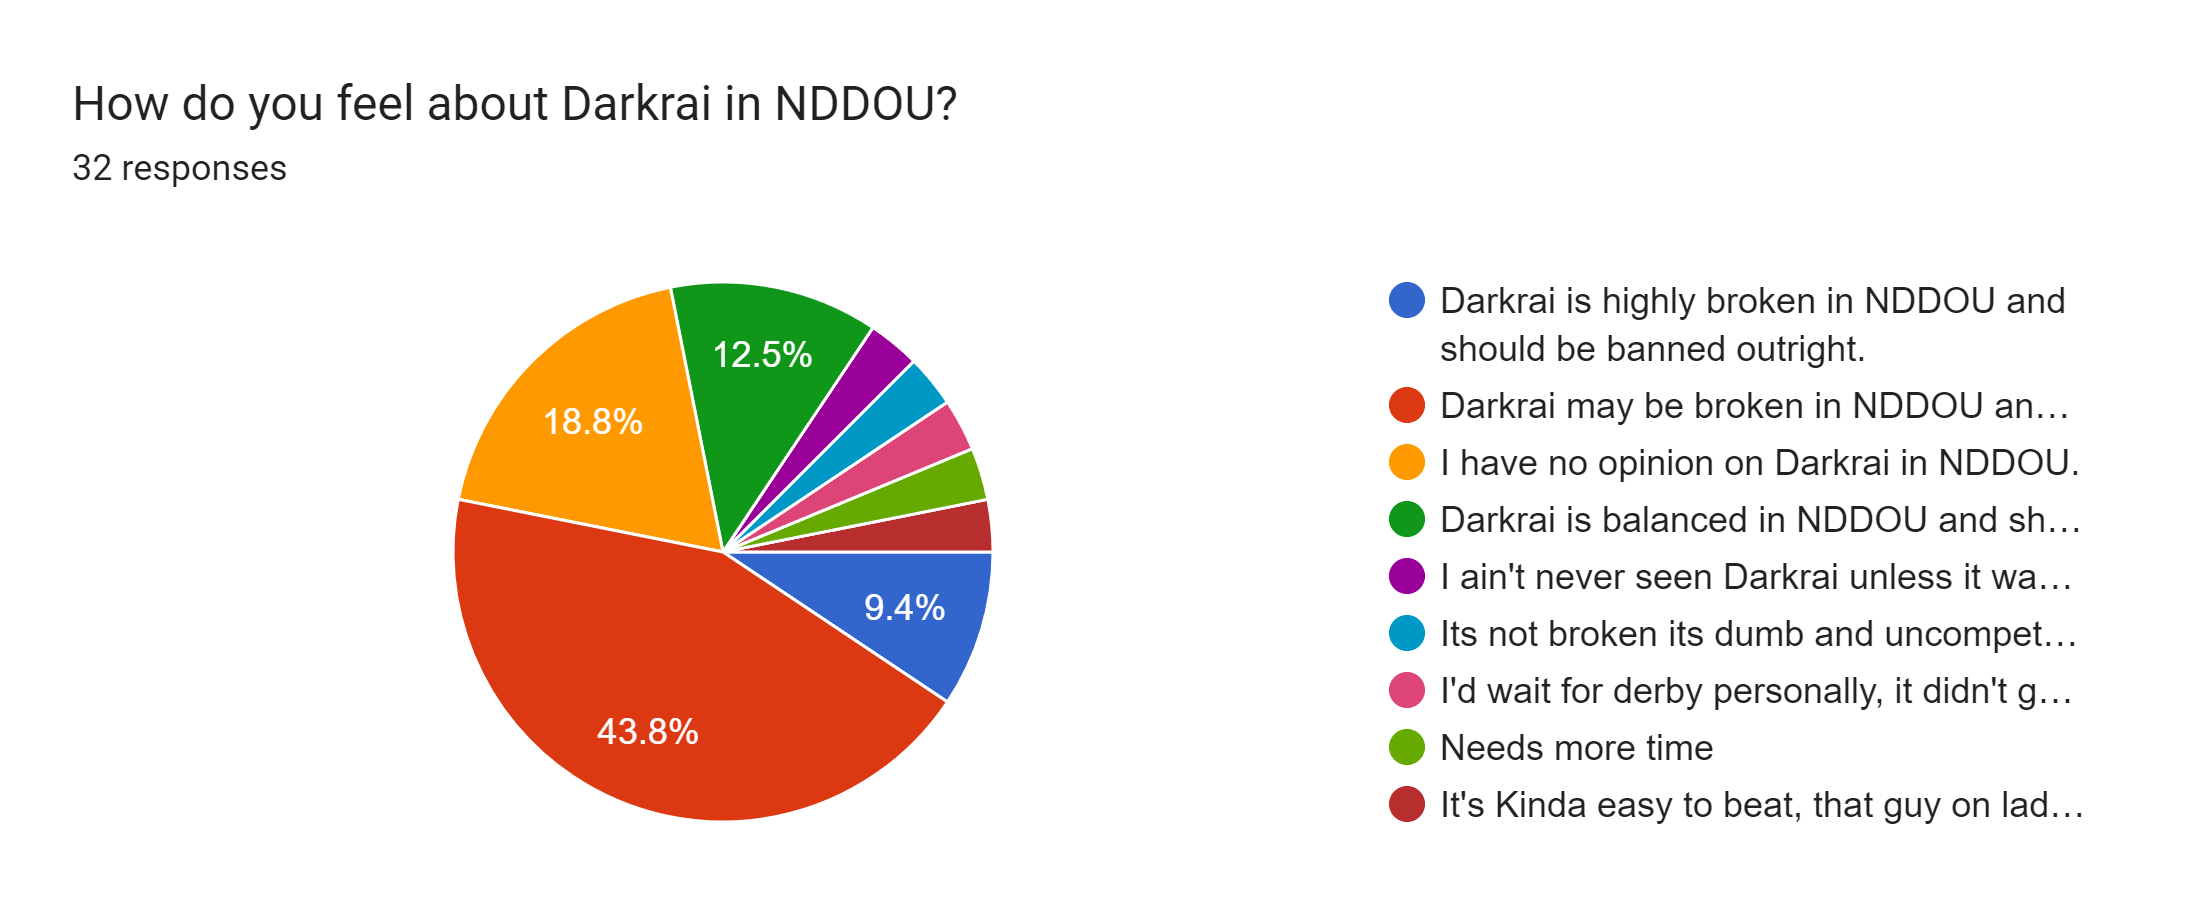 Forms response chart. Question title: How do you feel about Darkrai in NDDOU?. Number of responses: 32 responses.